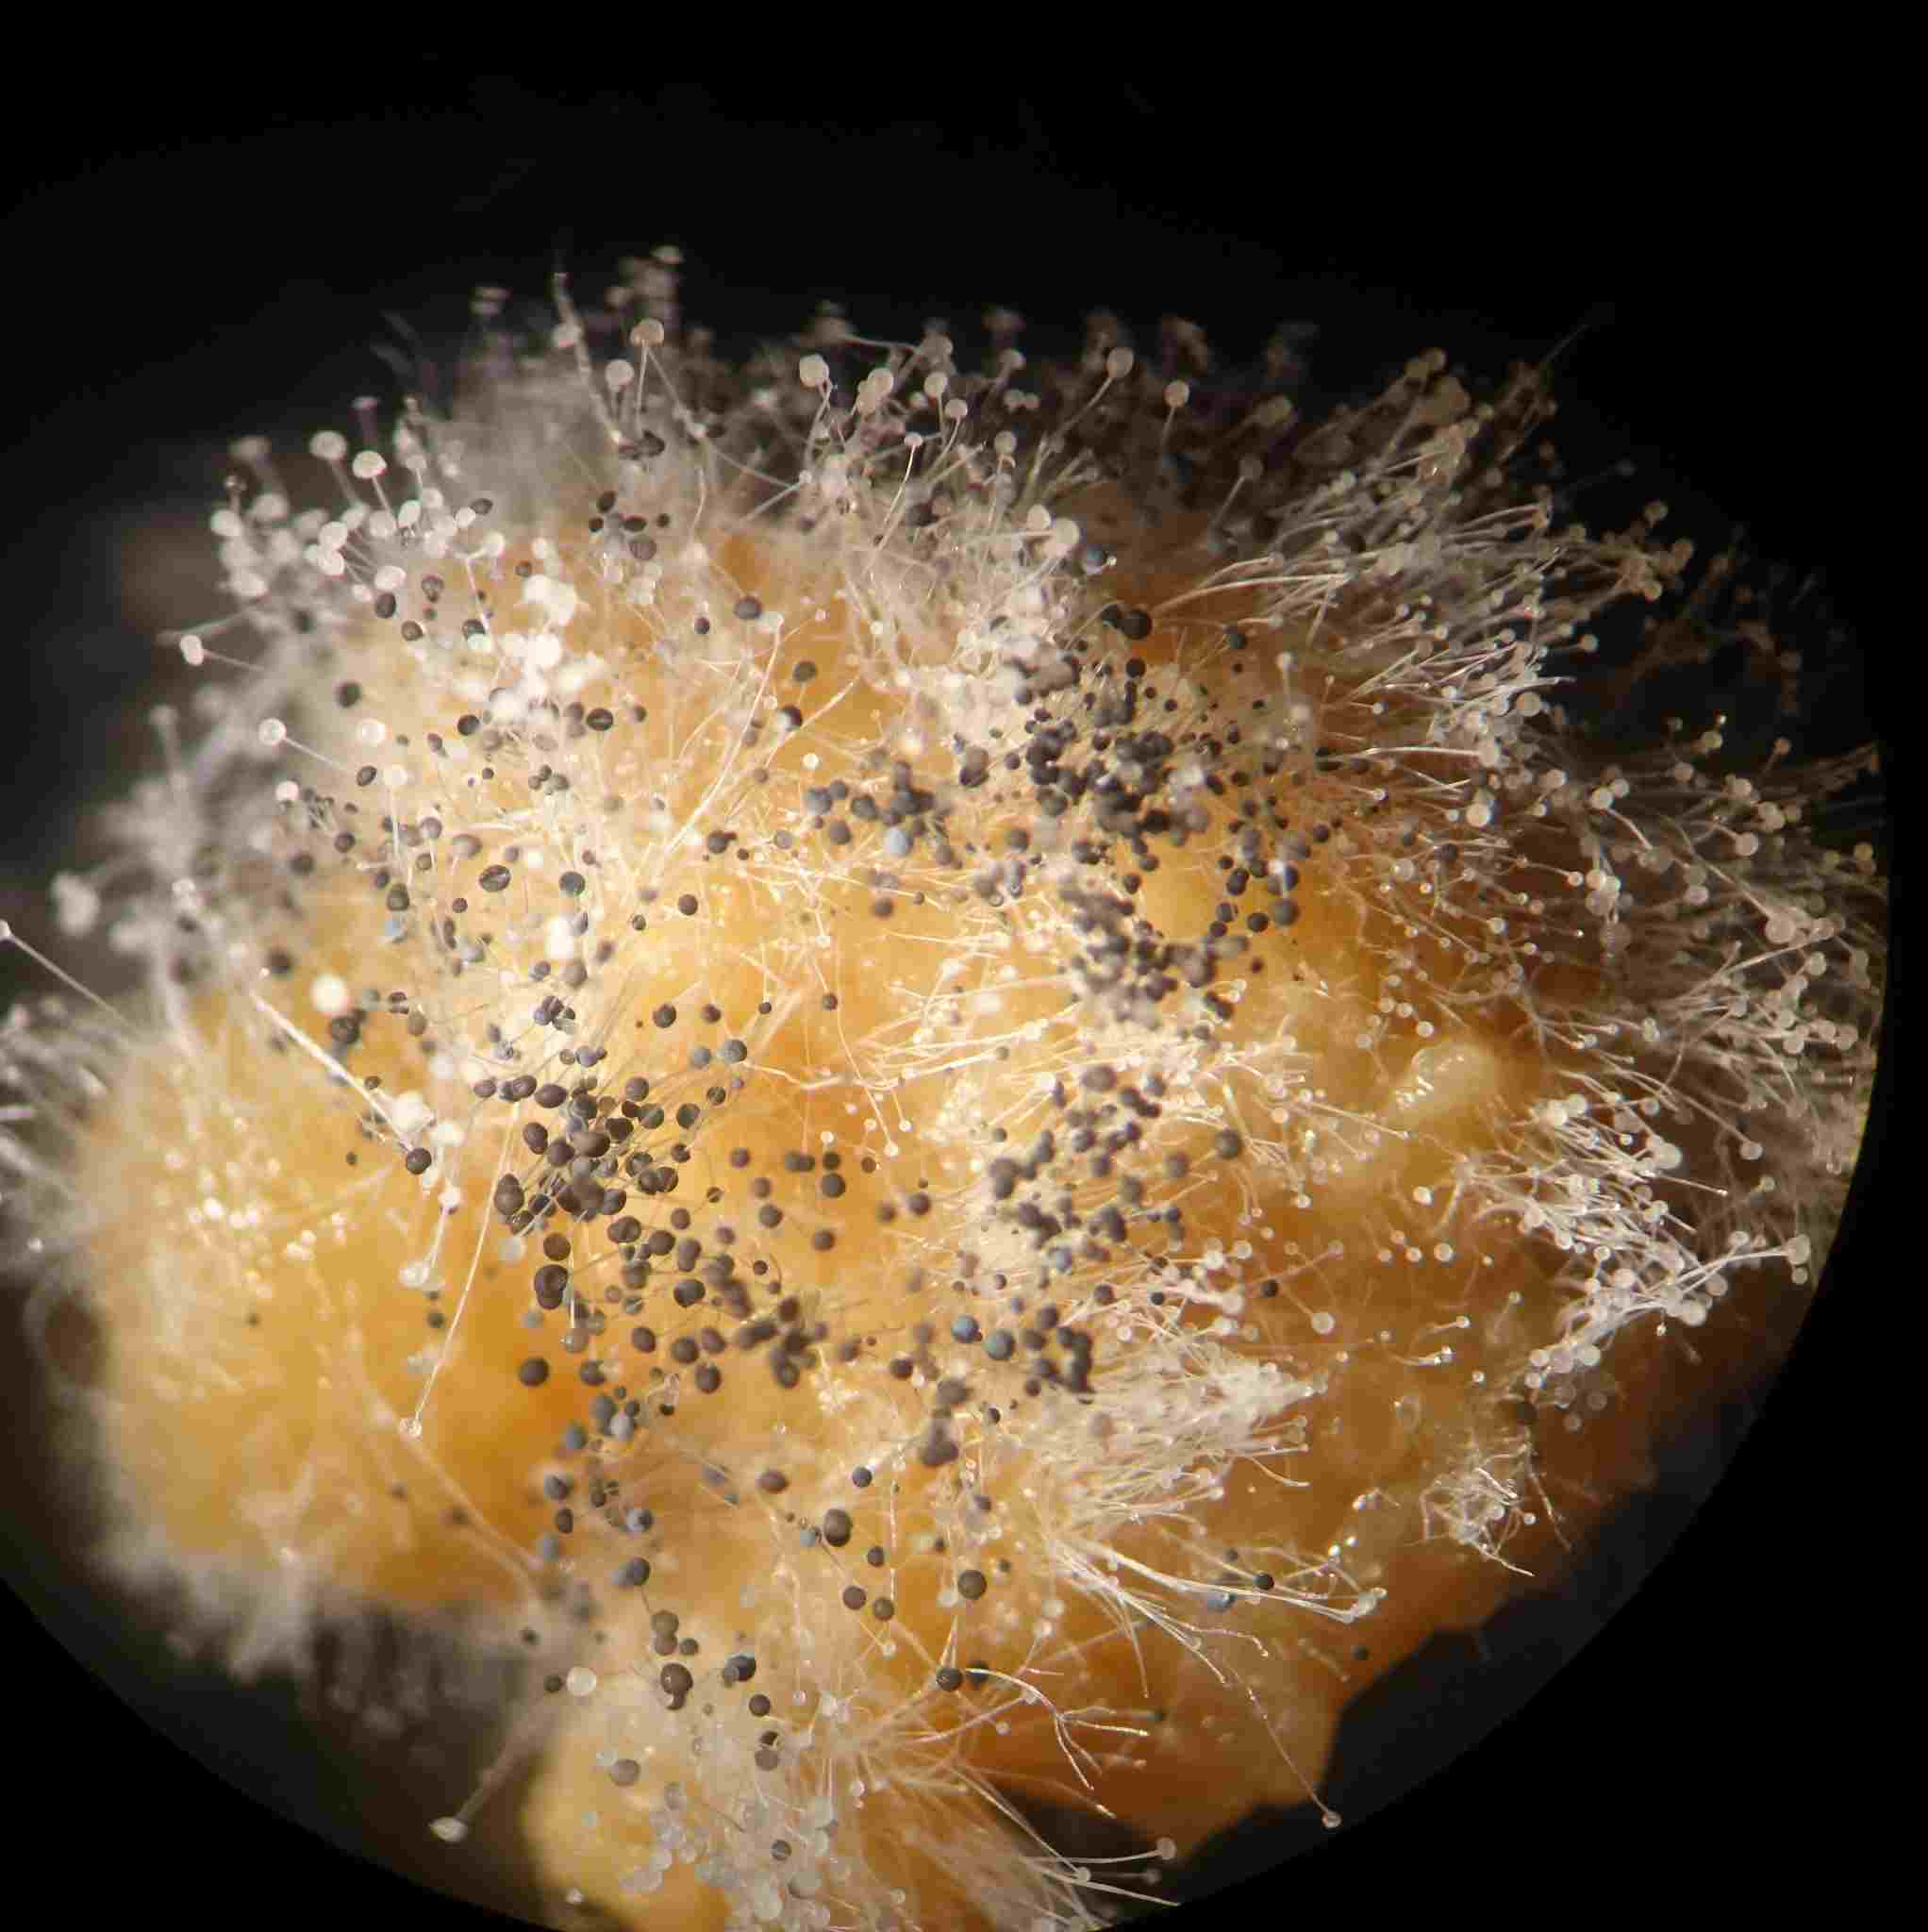 Decomposers in the Ocean: Fungi like Mucor spp. are Active in the Ocean and Its Environs (Credit: Scot Nelson 2017 .CC0 1.0.)